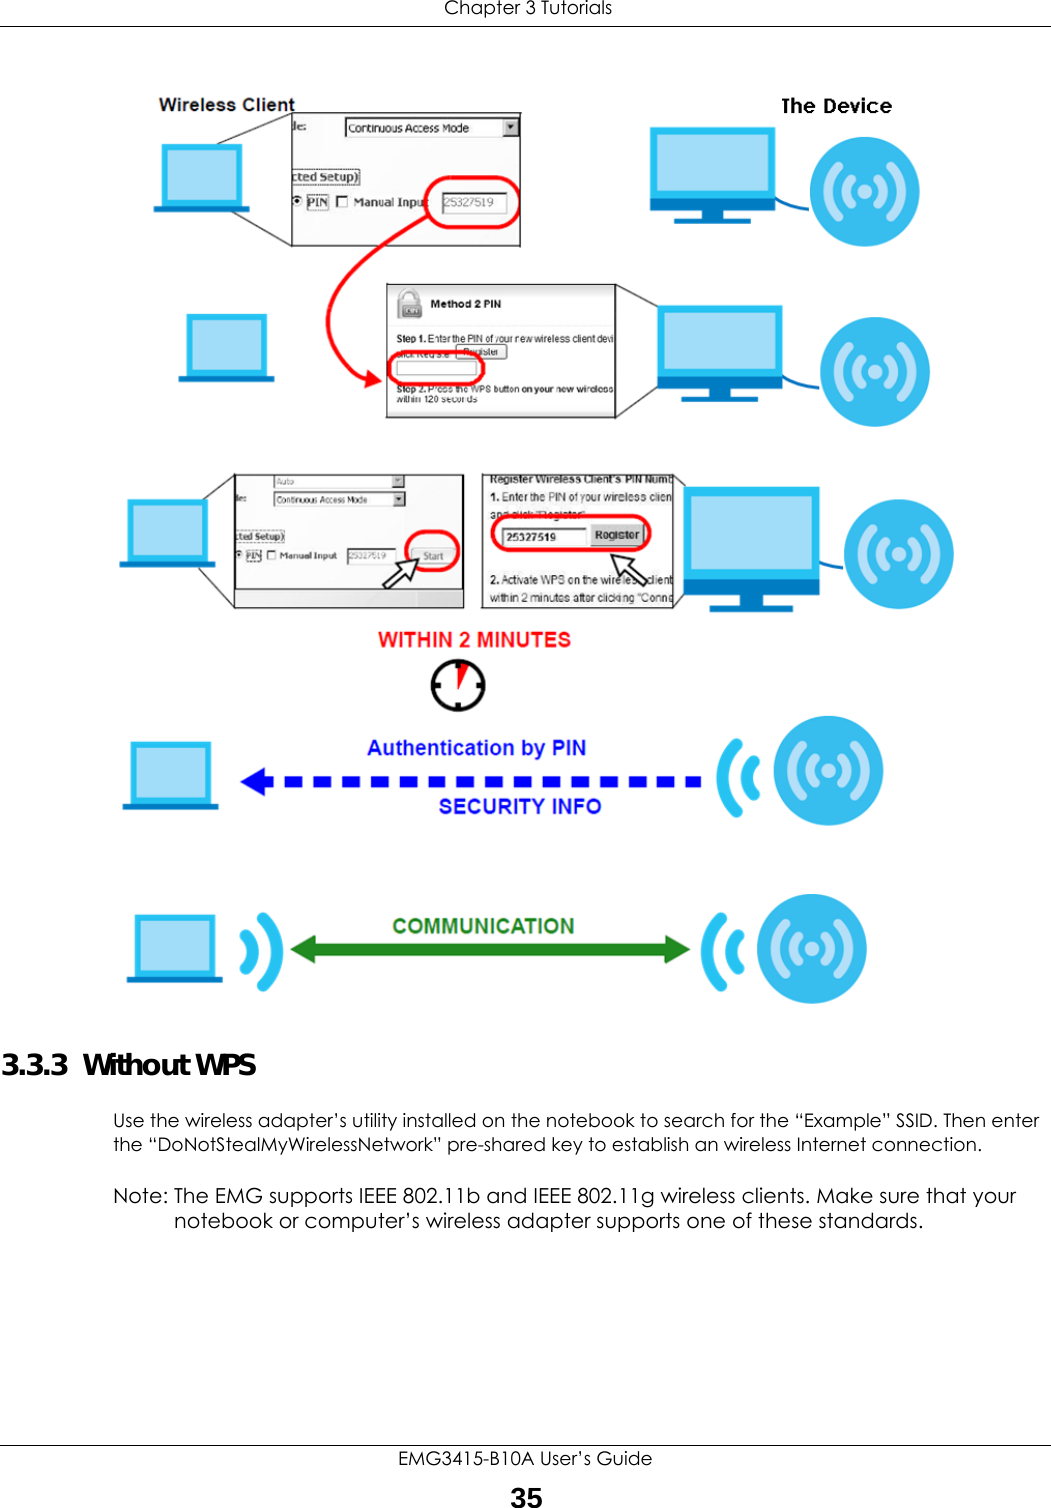  Chapter 3 TutorialsEMG3415-B10A User’s Guide35Example WPS Process: PIN Method3.3.3  Without WPSUse the wireless adapter’s utility installed on the notebook to search for the “Example” SSID. Then enter the “DoNotStealMyWirelessNetwork” pre-shared key to establish an wireless Internet connection.Note: The EMG supports IEEE 802.11b and IEEE 802.11g wireless clients. Make sure that your notebook or computer’s wireless adapter supports one of these standards.